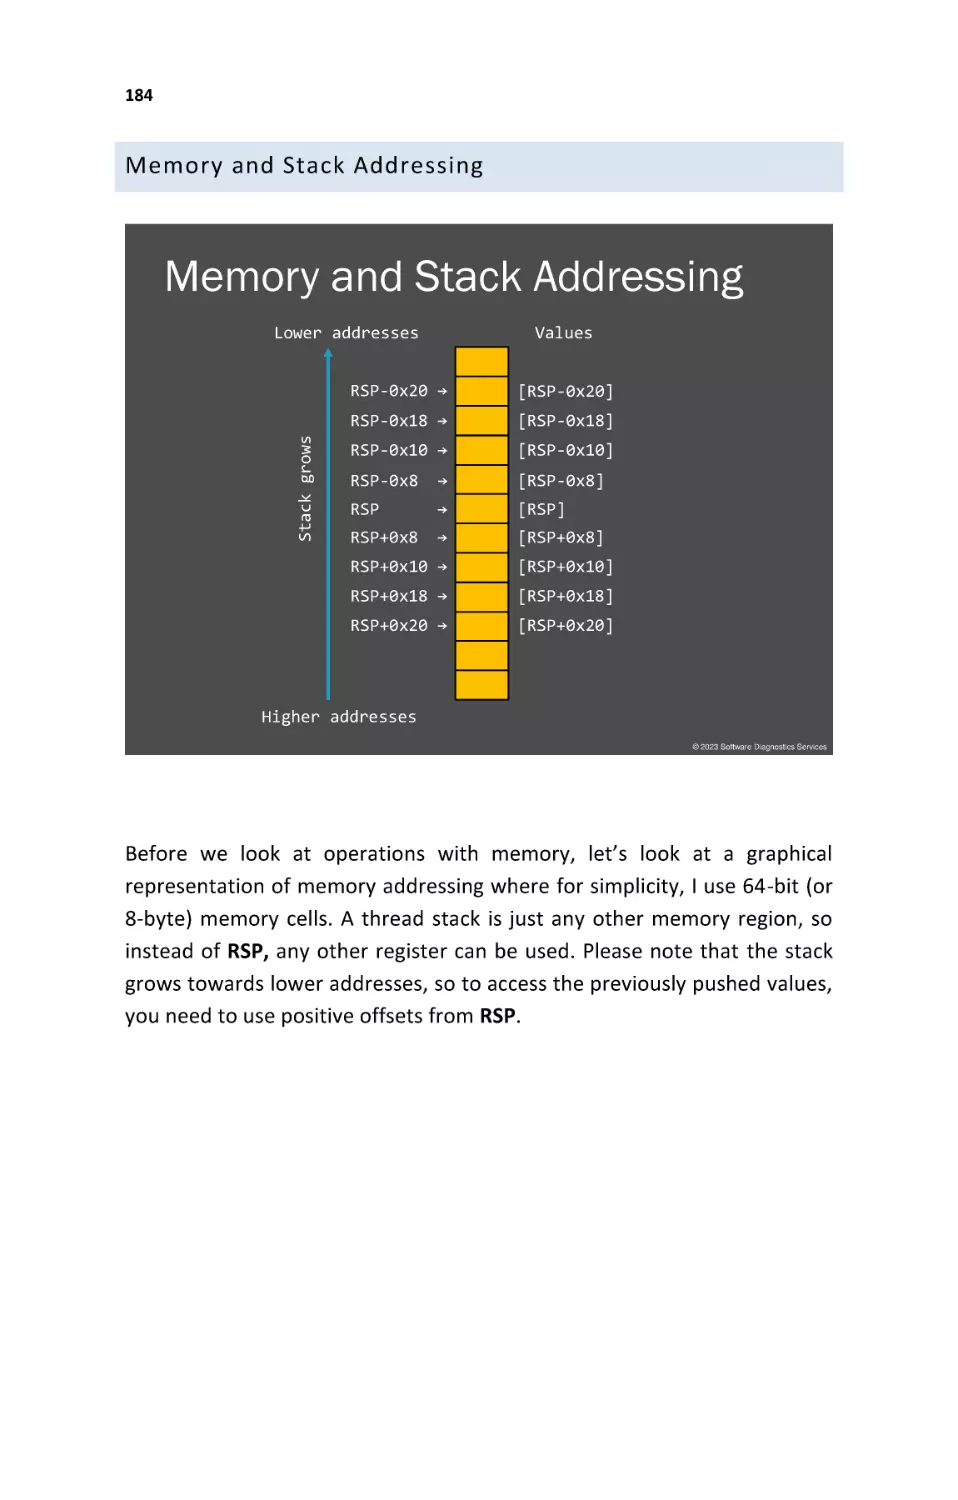 Memory and Stack Addressing